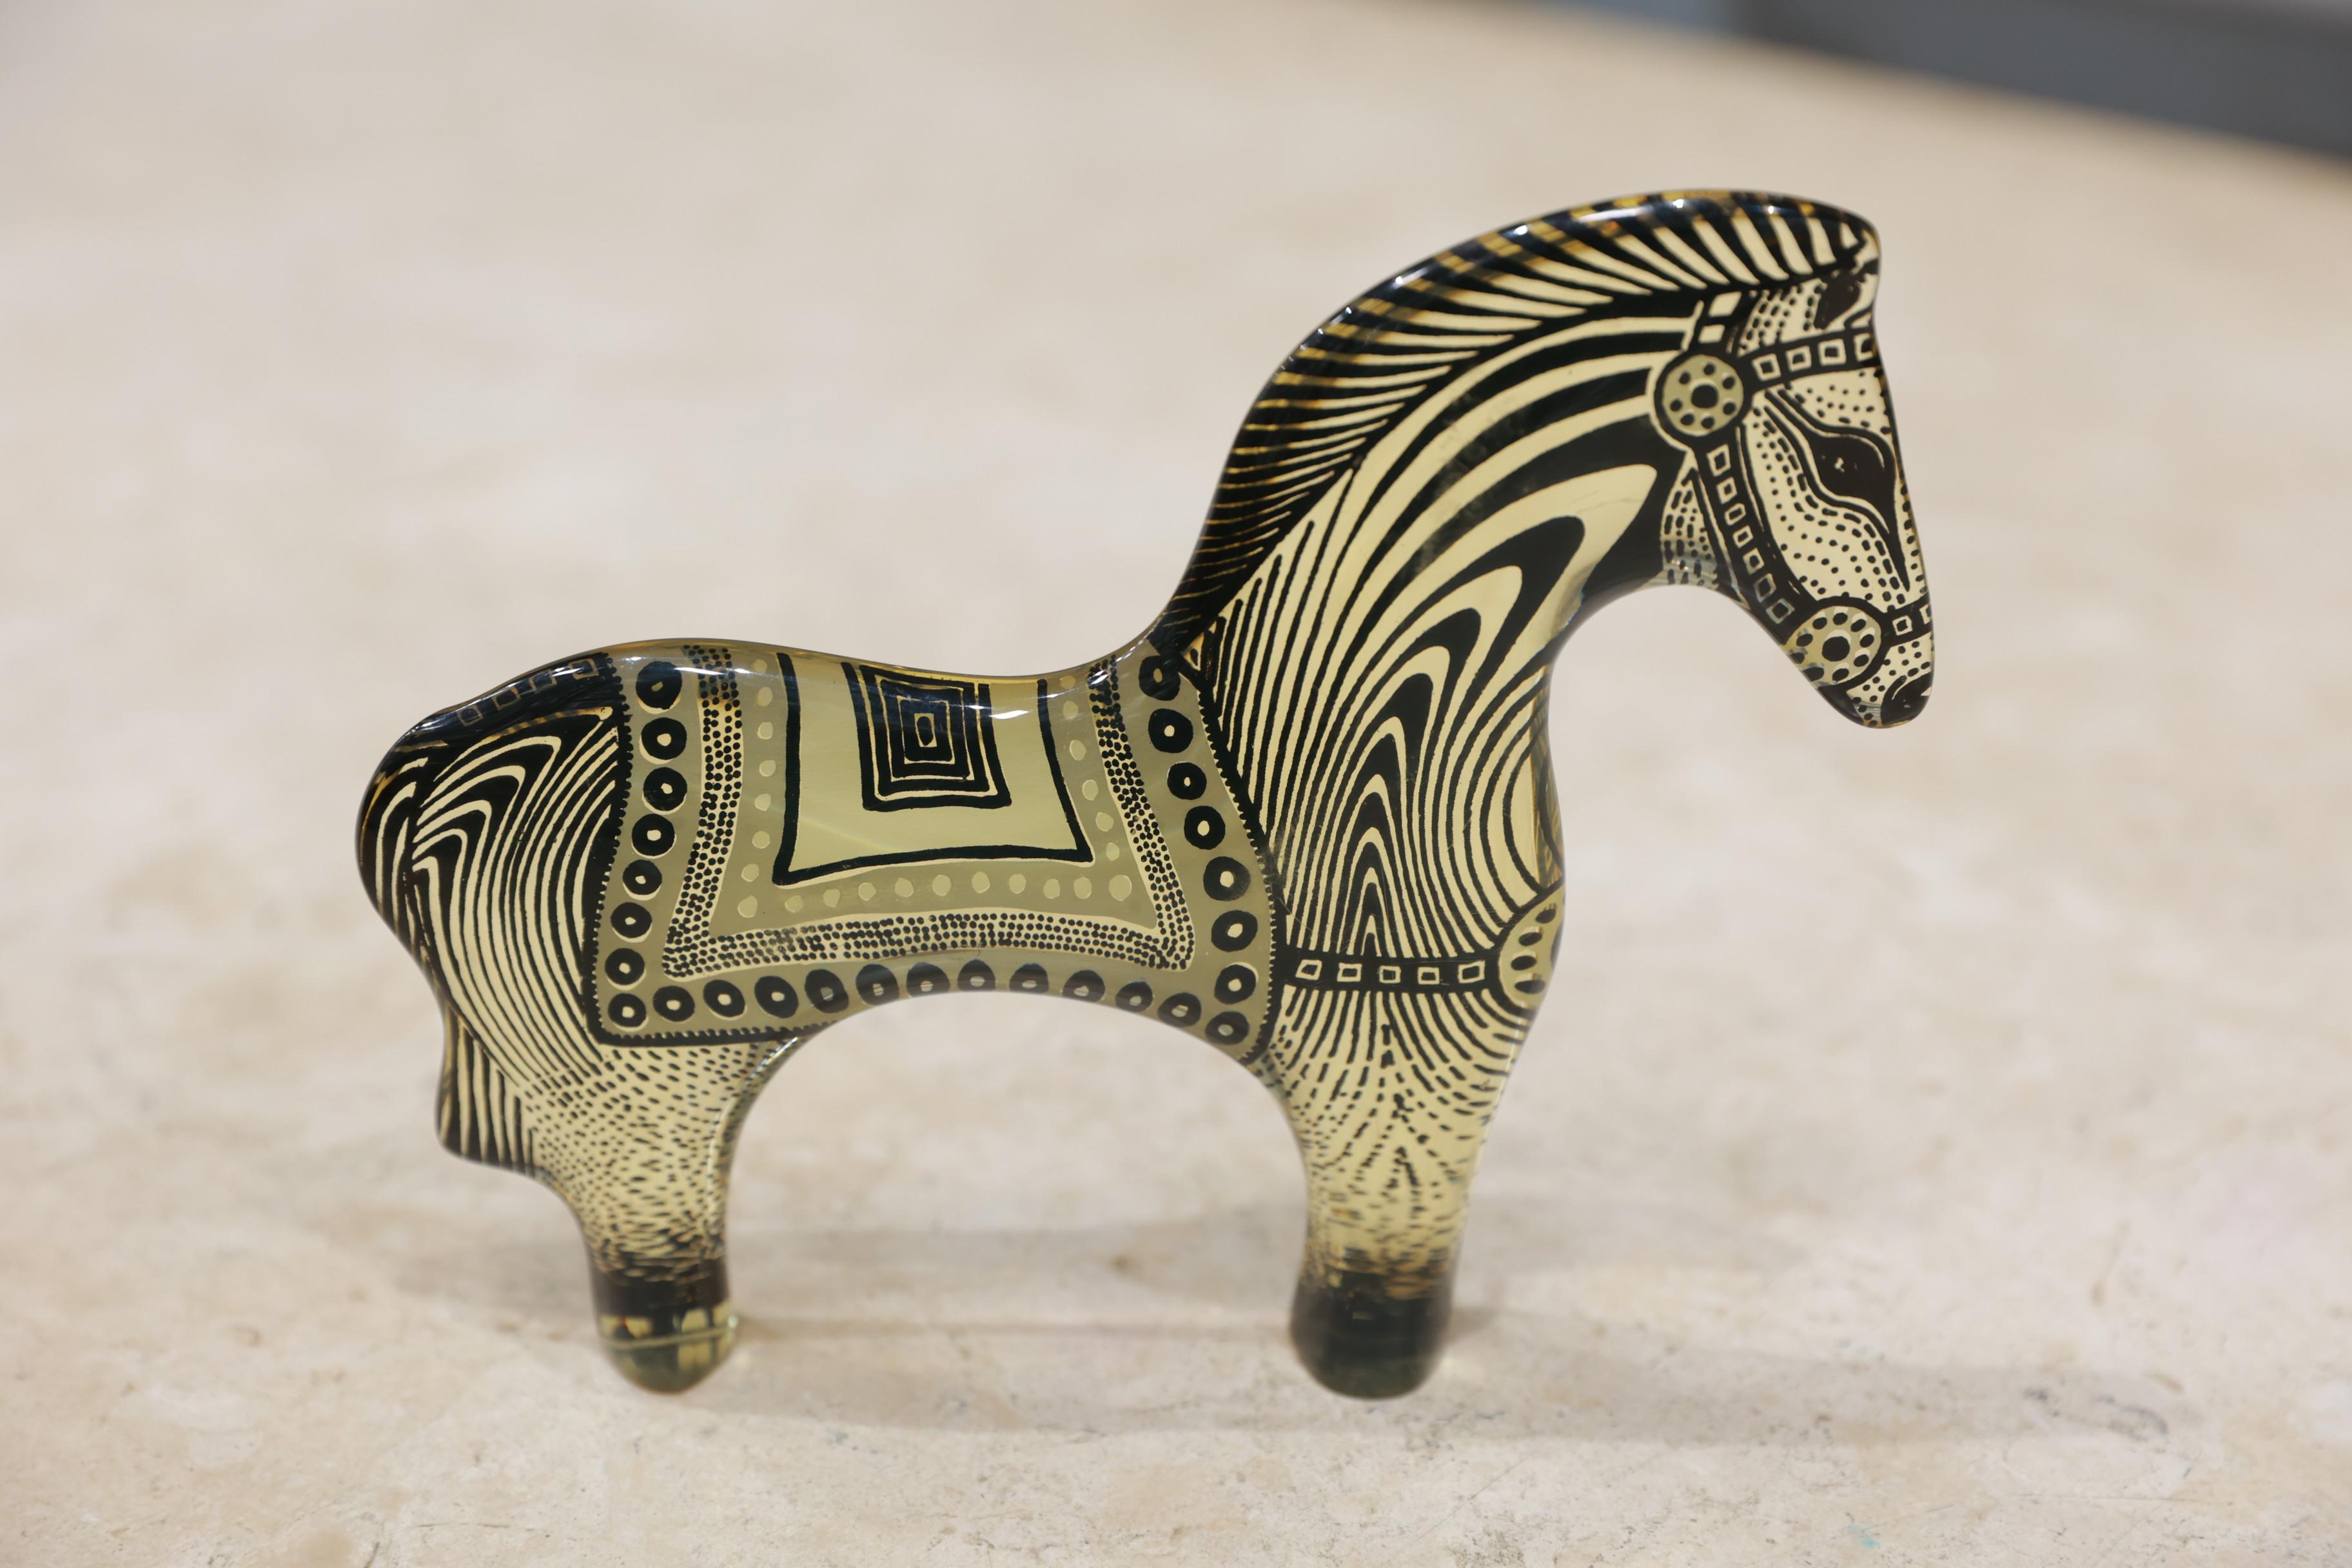 Available today, this Brazilian Modern Kinetic Sculpture of a Zebra in Resin by Abraham Palatinik made in the 1960s is beautiful!

This is part of the Artemis collection that features hundreds of different animals, each with sleek, flat silhouettes.